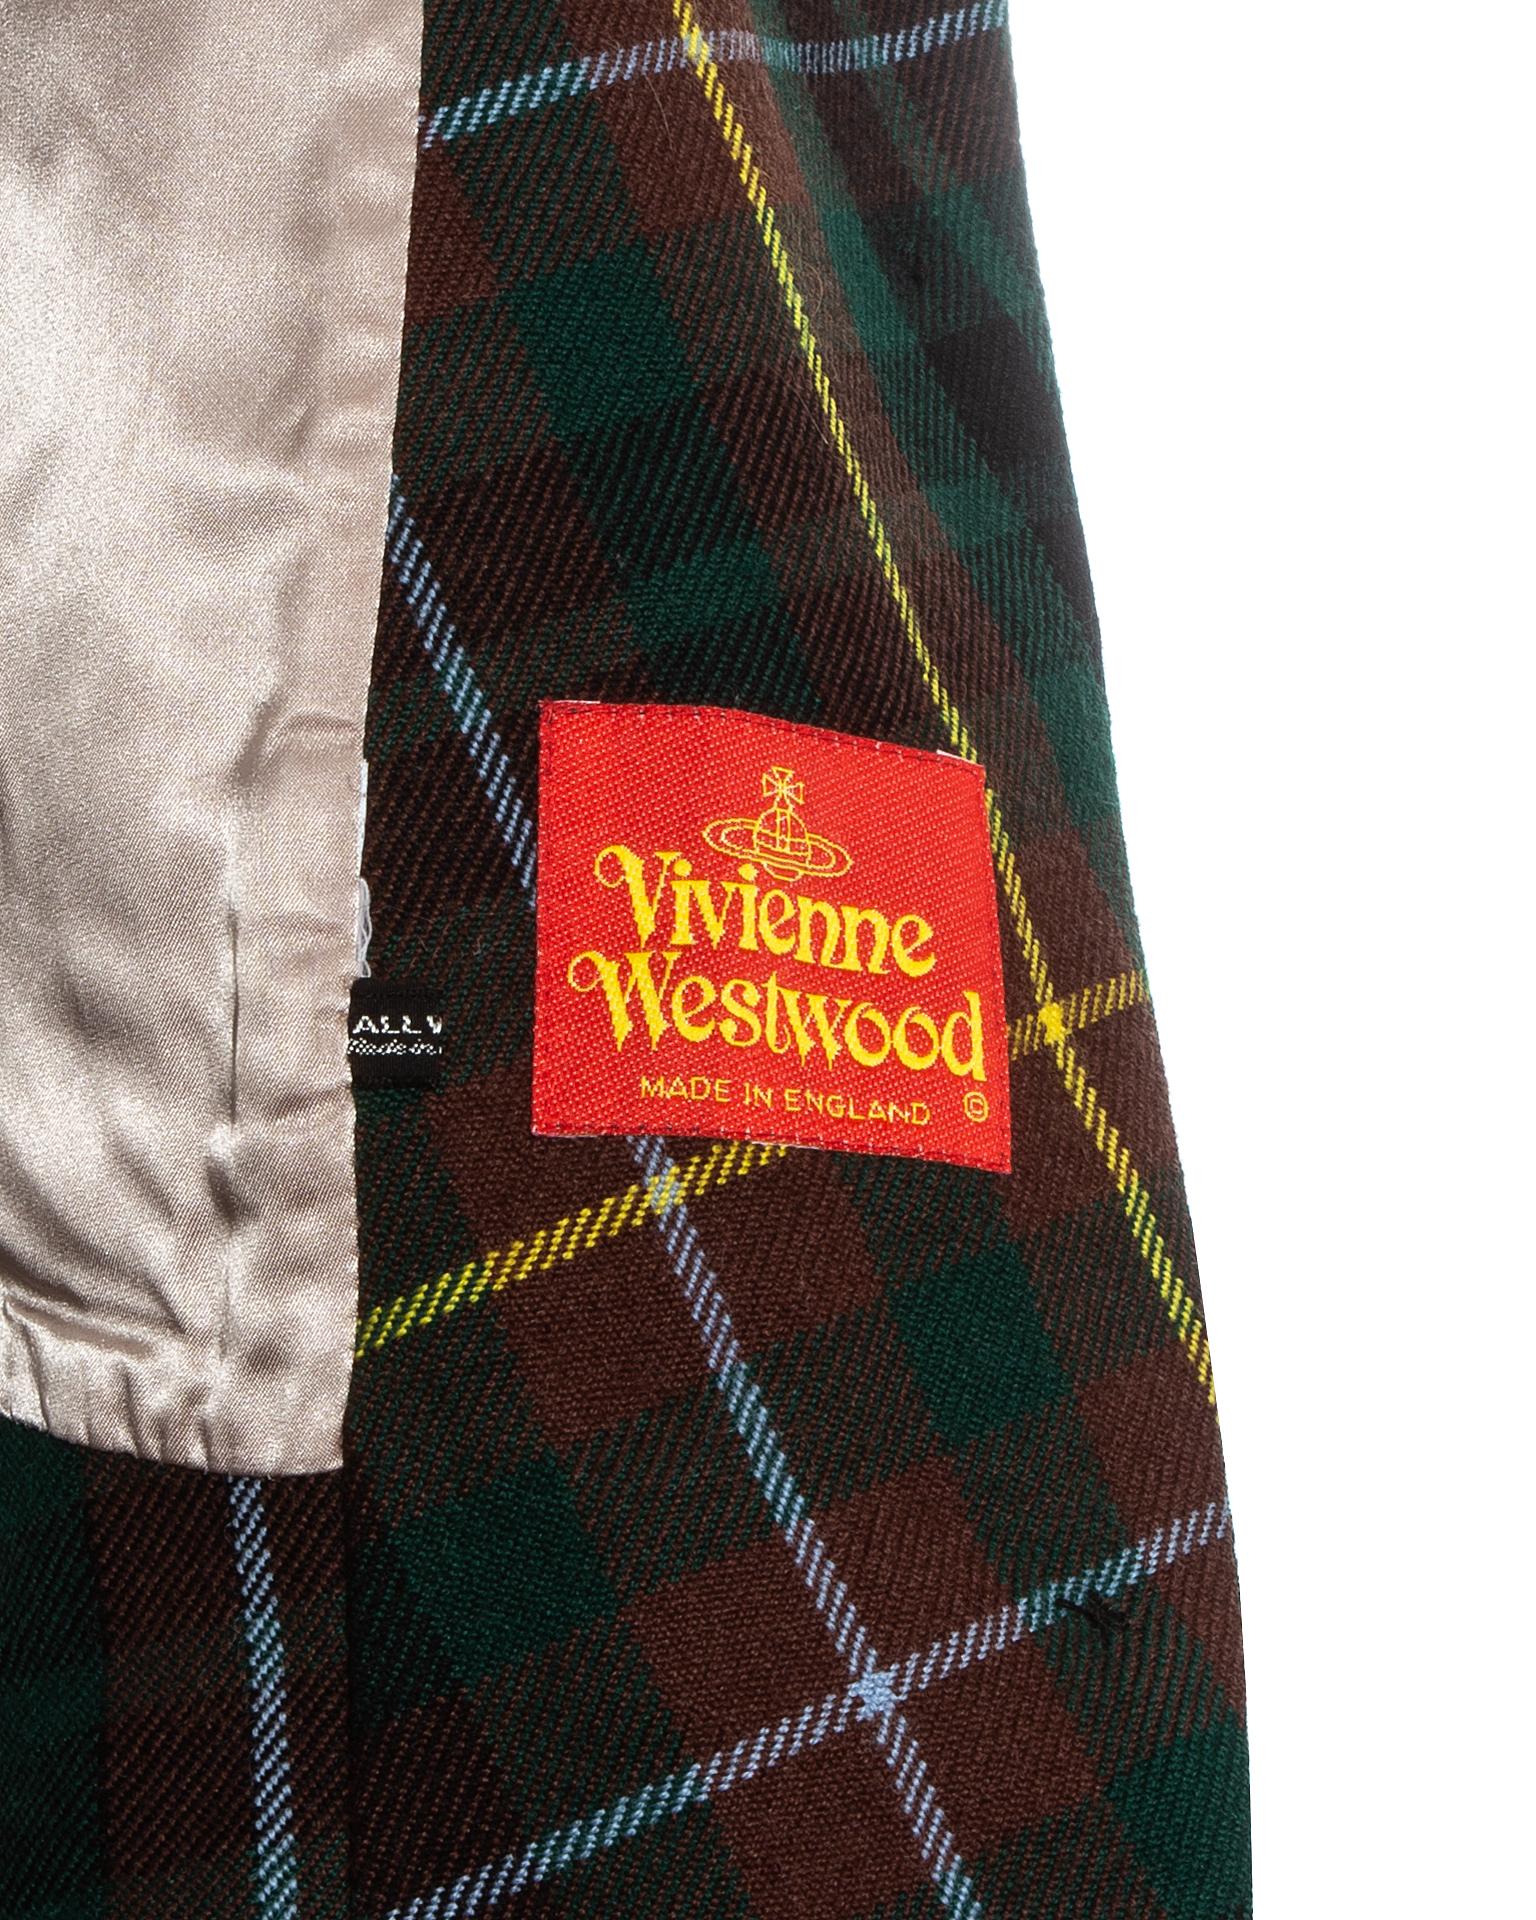 Vivienne Westwood green tartan wool fitted jacket with 15 gold buttons, fw 1988 For Sale 2